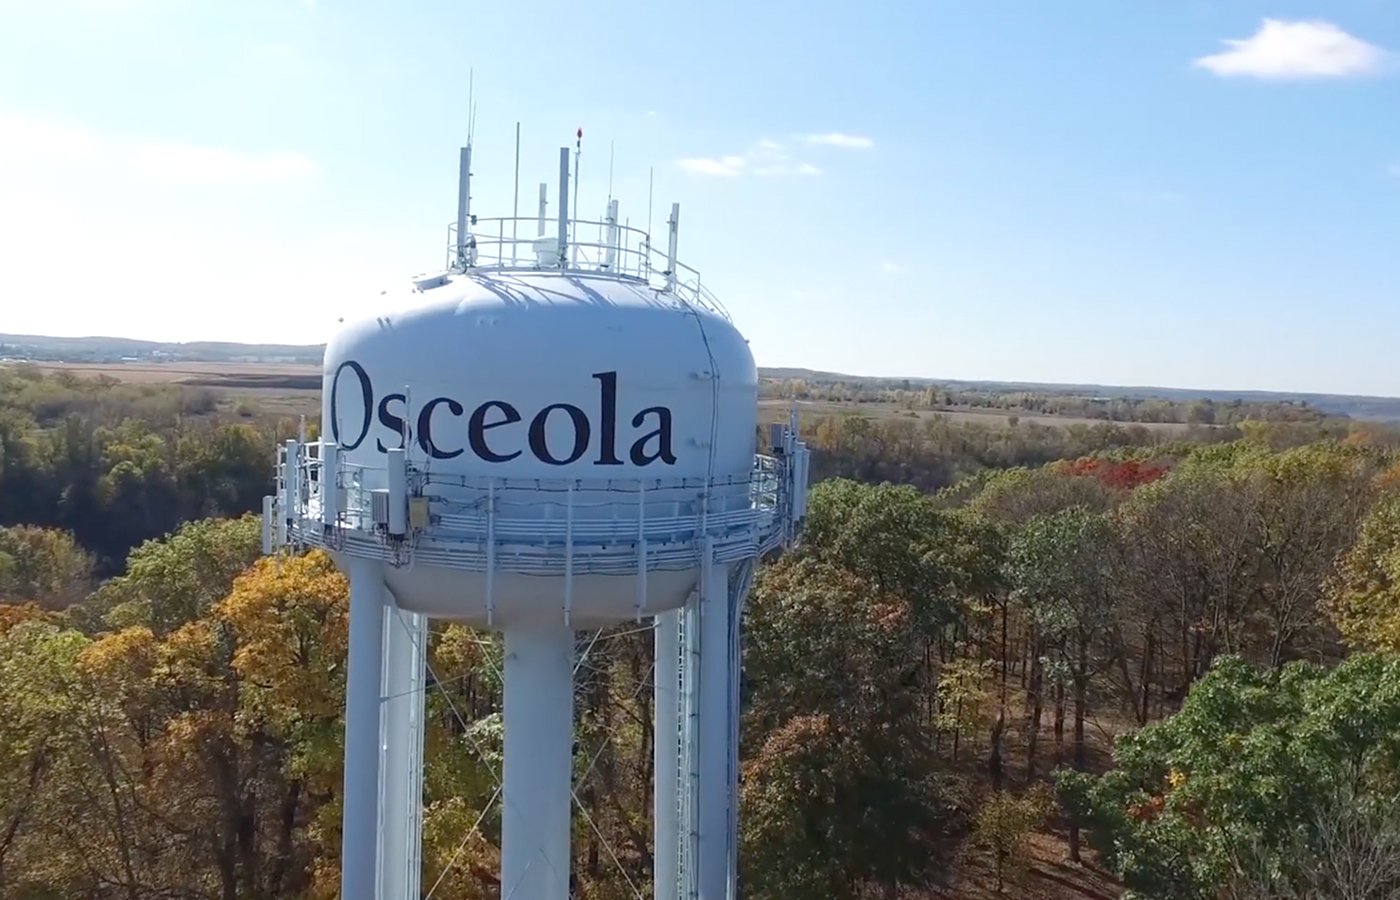 Just Off Main Street - Featuring our town of Osceola, WI